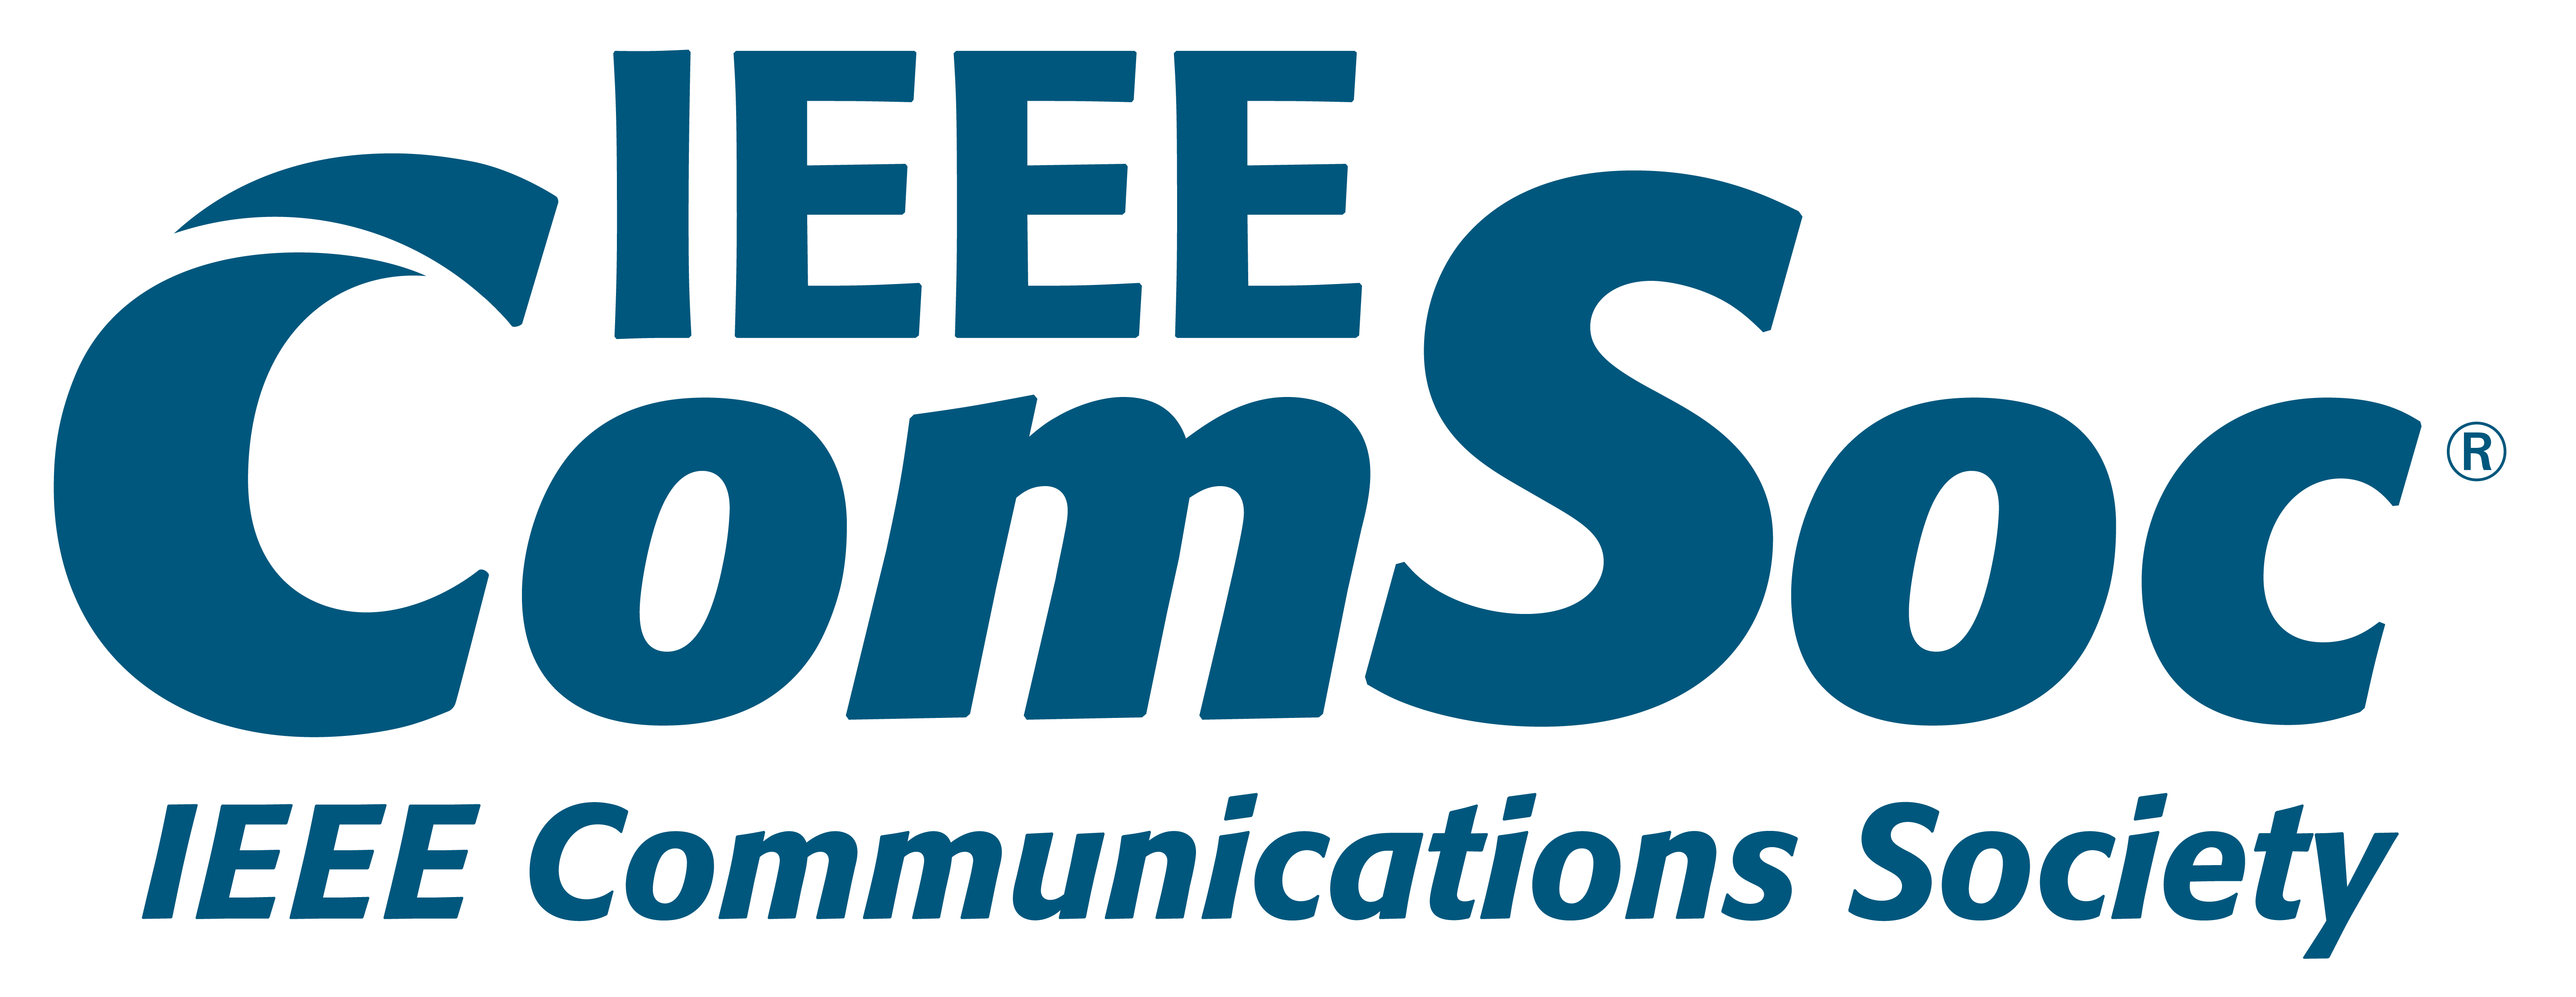 Technically co-sponsored by IEEE Communication Society